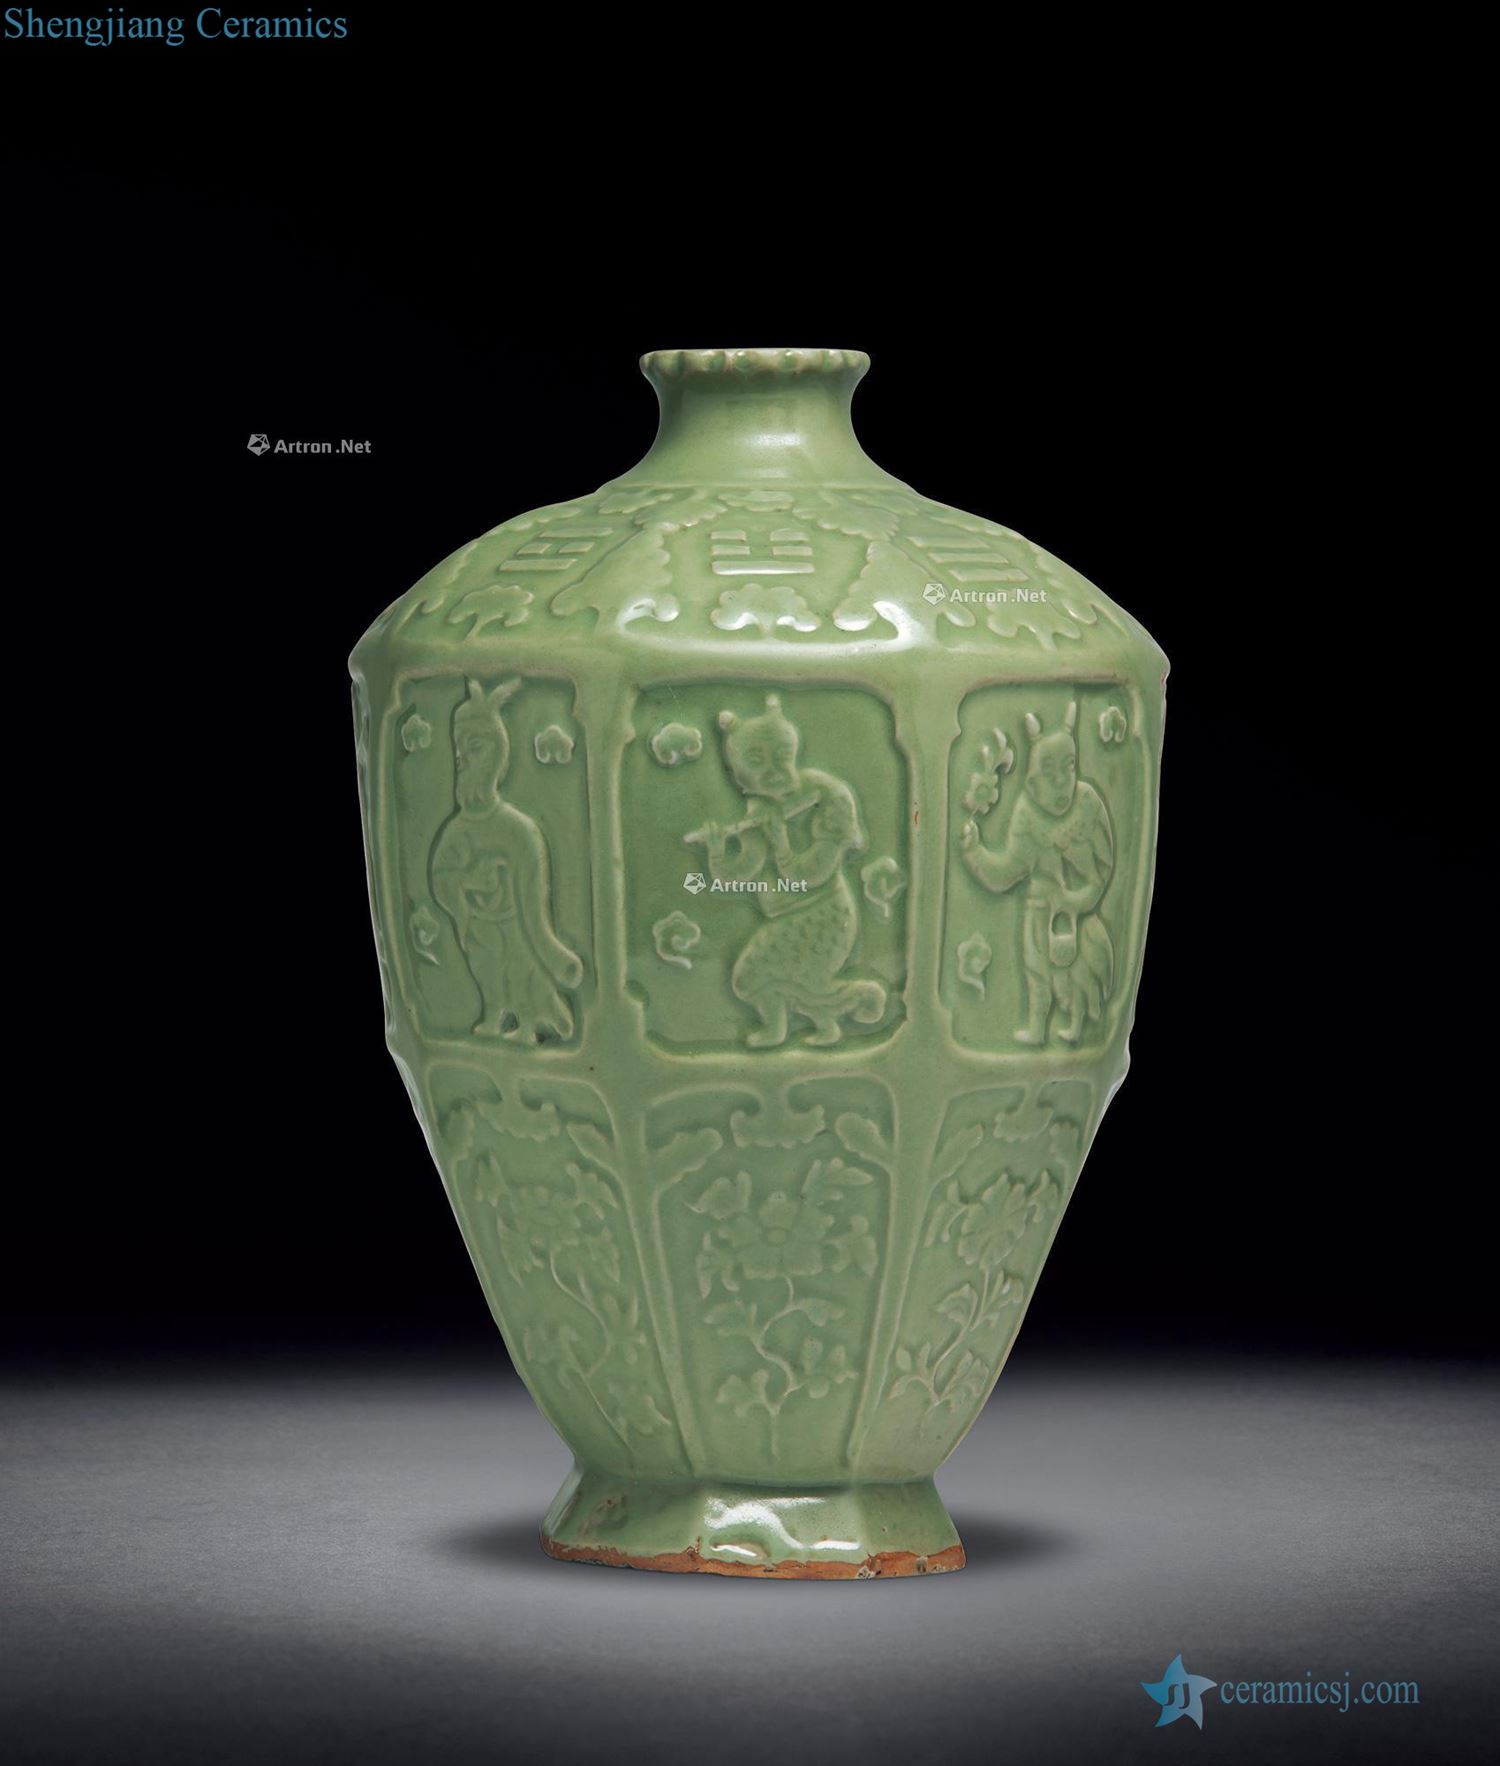 In the Ming dynasty Longquan green glaze mei bottles of the eight immortals characters